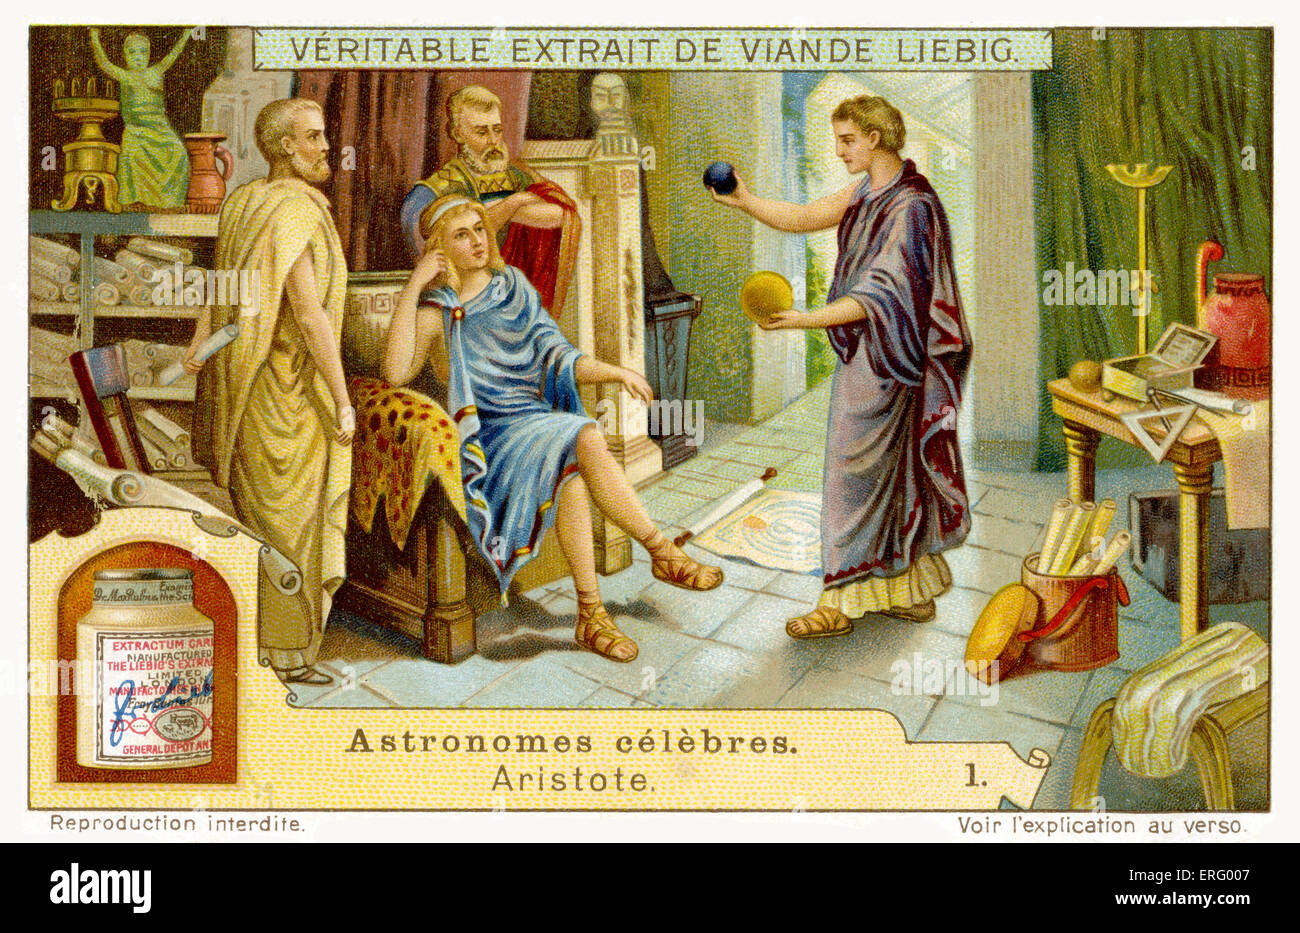 Aristotle at the court of Philip of Macedonia, educating his son the future Alexander the Great, aged 13. Teaching the boy about the laws of the Cosmos. Aristotle, Greek philosopher, a student of Plato: 384 BC – 322 BC. (Liebig series Famous Astronomers / Astronomes celebres). Stock Photo